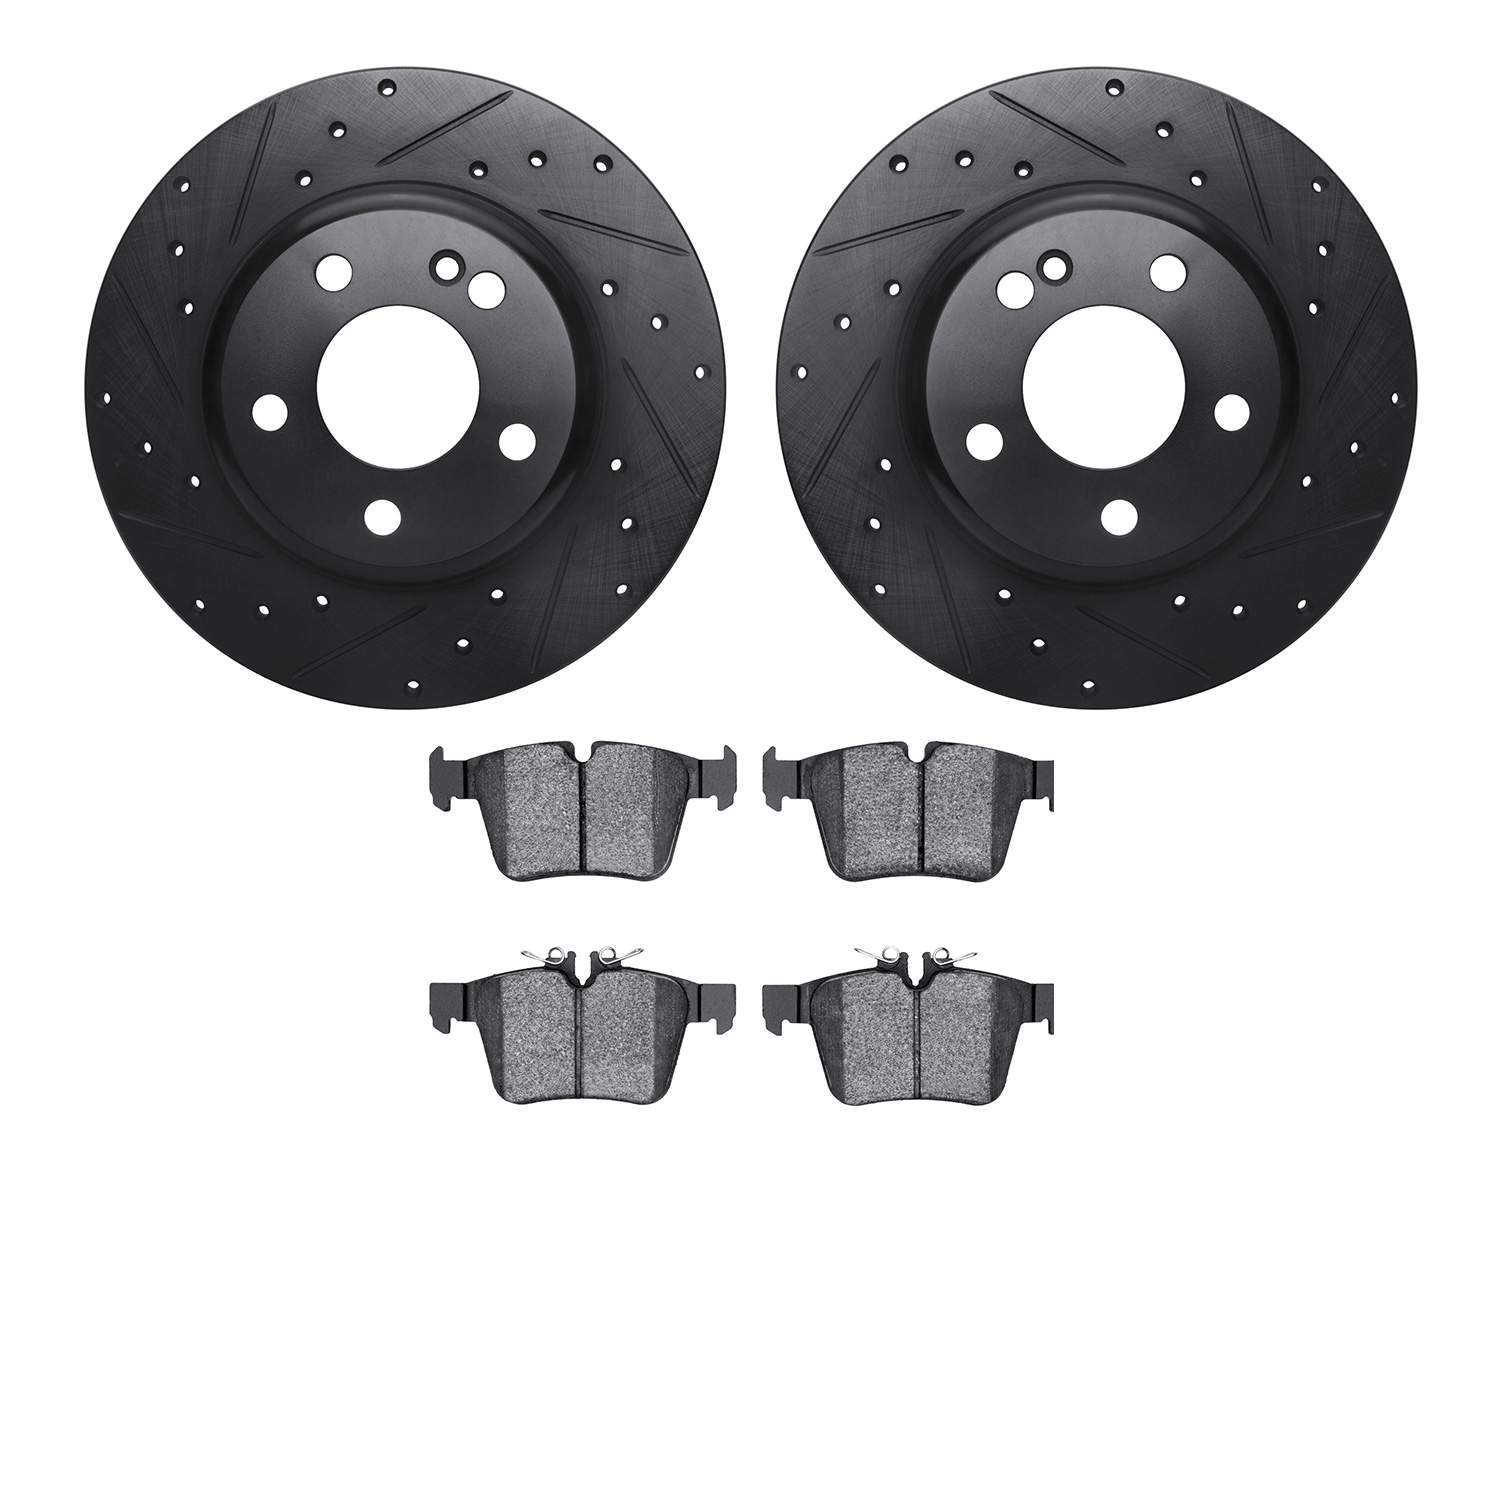 8302-63142 Drilled/Slotted Brake Rotors with 3000-Series Ceramic Brake Pads Kit [Black], 2015-2021 Mercedes-Benz, Position: Rear